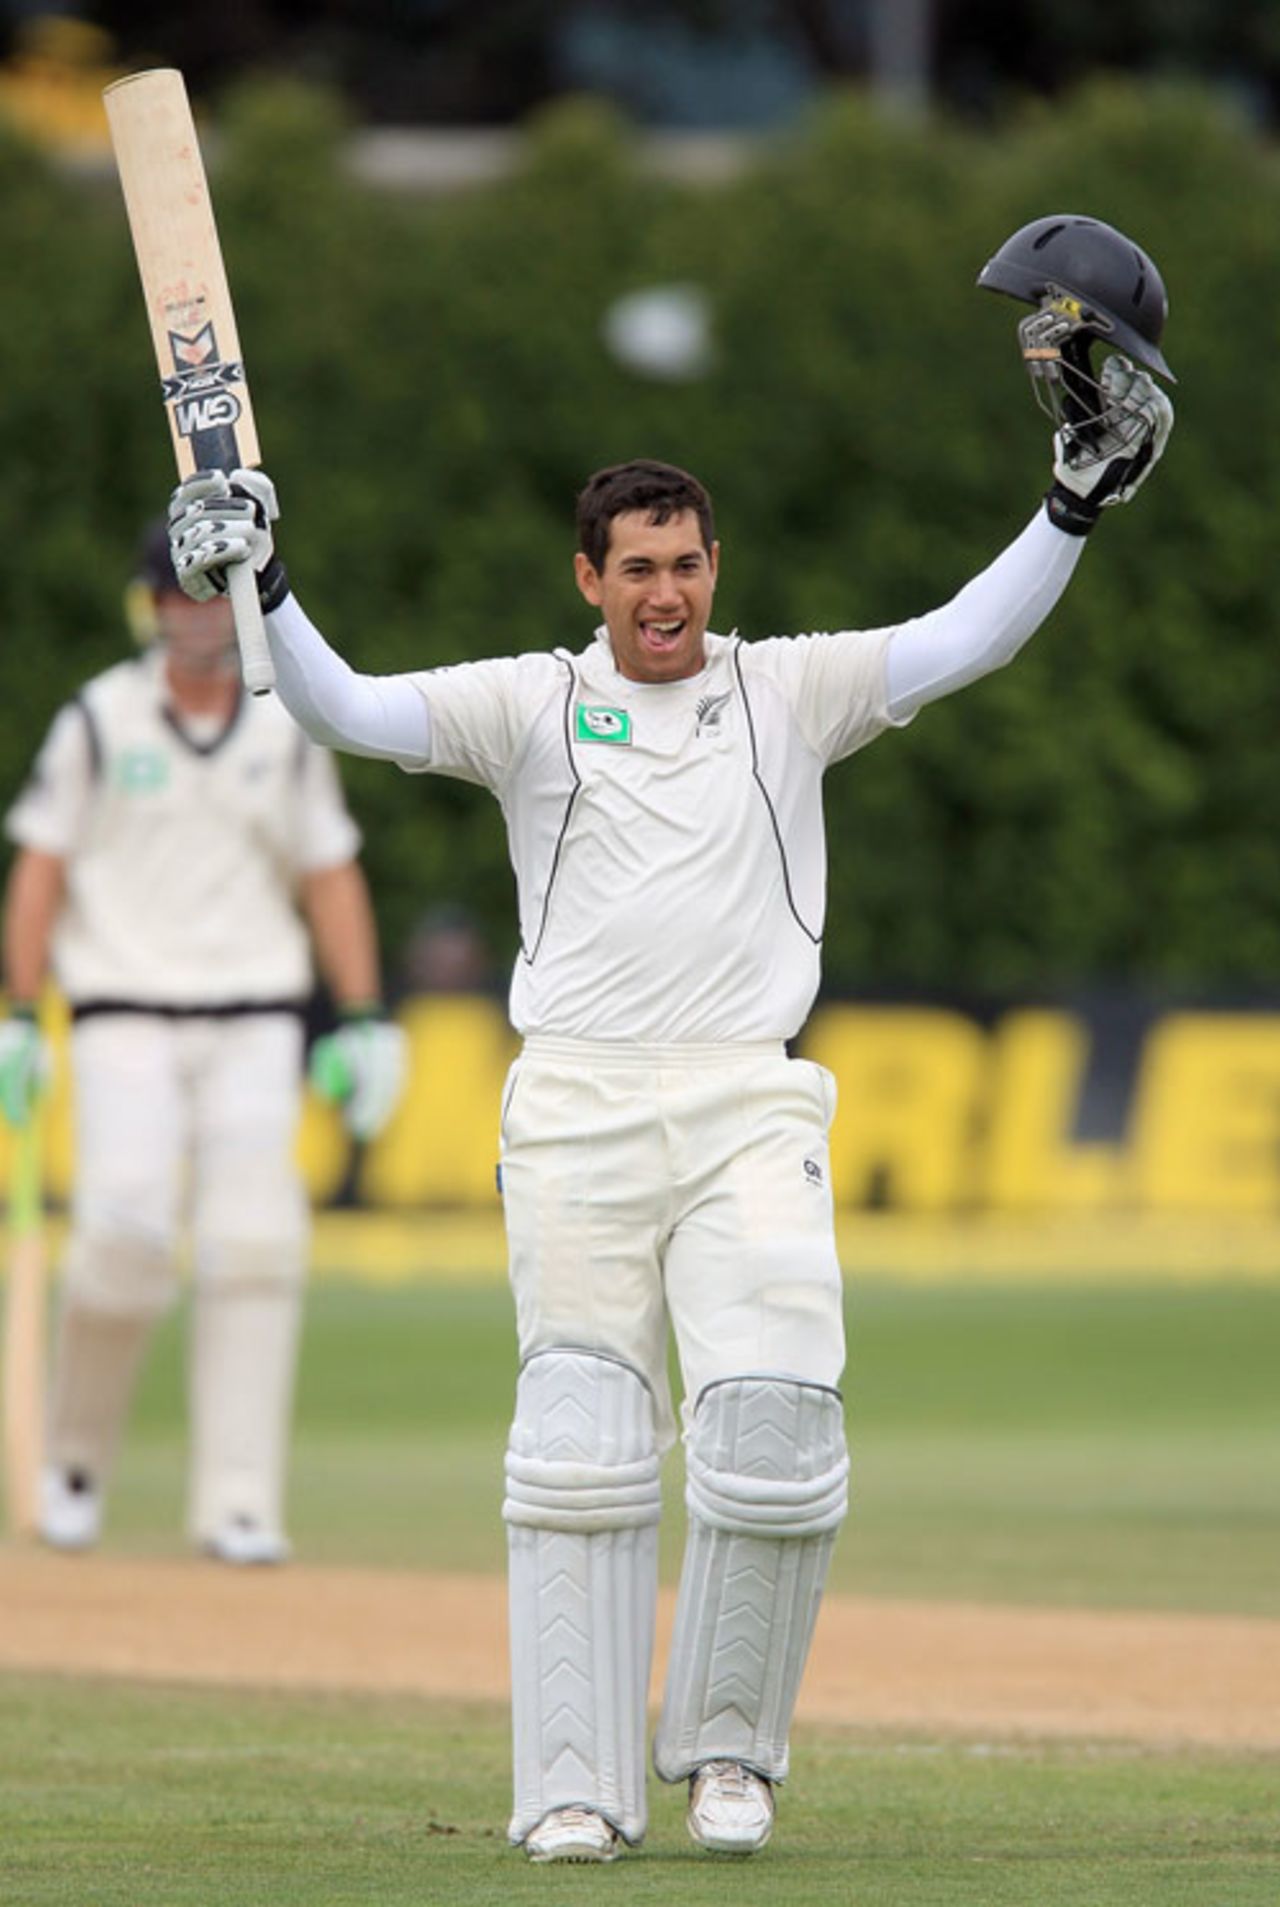 Ross Taylor is delighted at reaching his century, New Zealand v India, 3rd Test, Wellington, 5th day, April 7, 2009